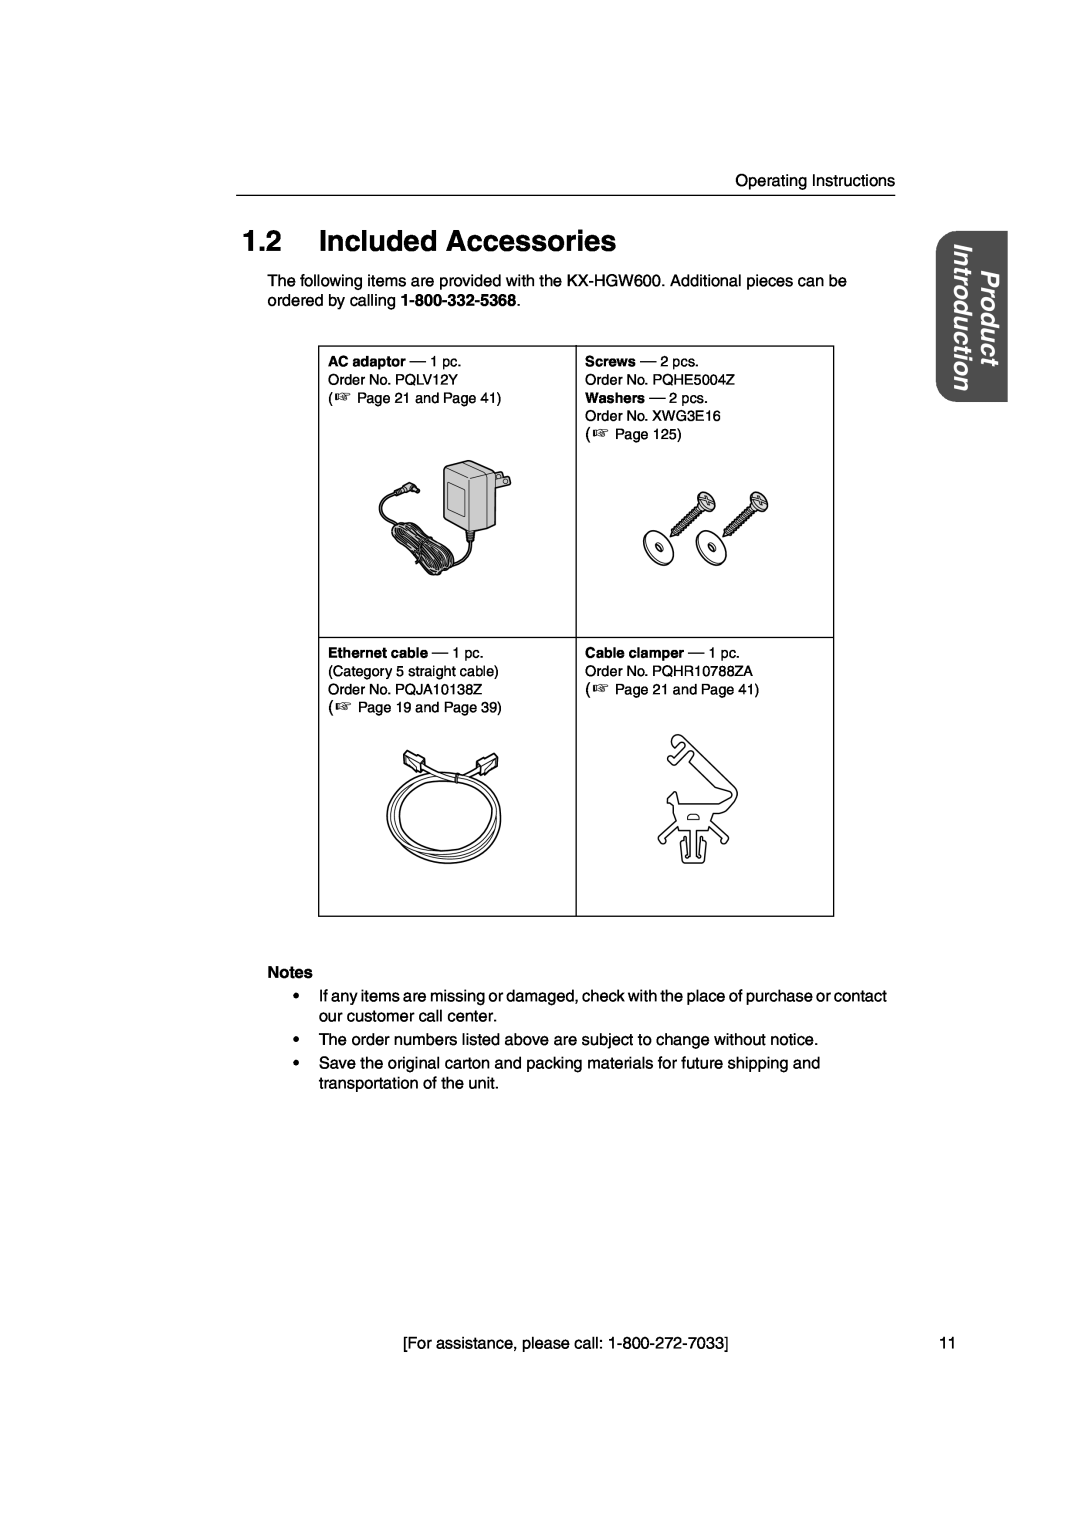 Panasonic KX-HGW600 manual Included Accessories, Introduction, Product, AC adaptor - 1 pc, Screws - 2 pcs, Washers - 2 pcs 